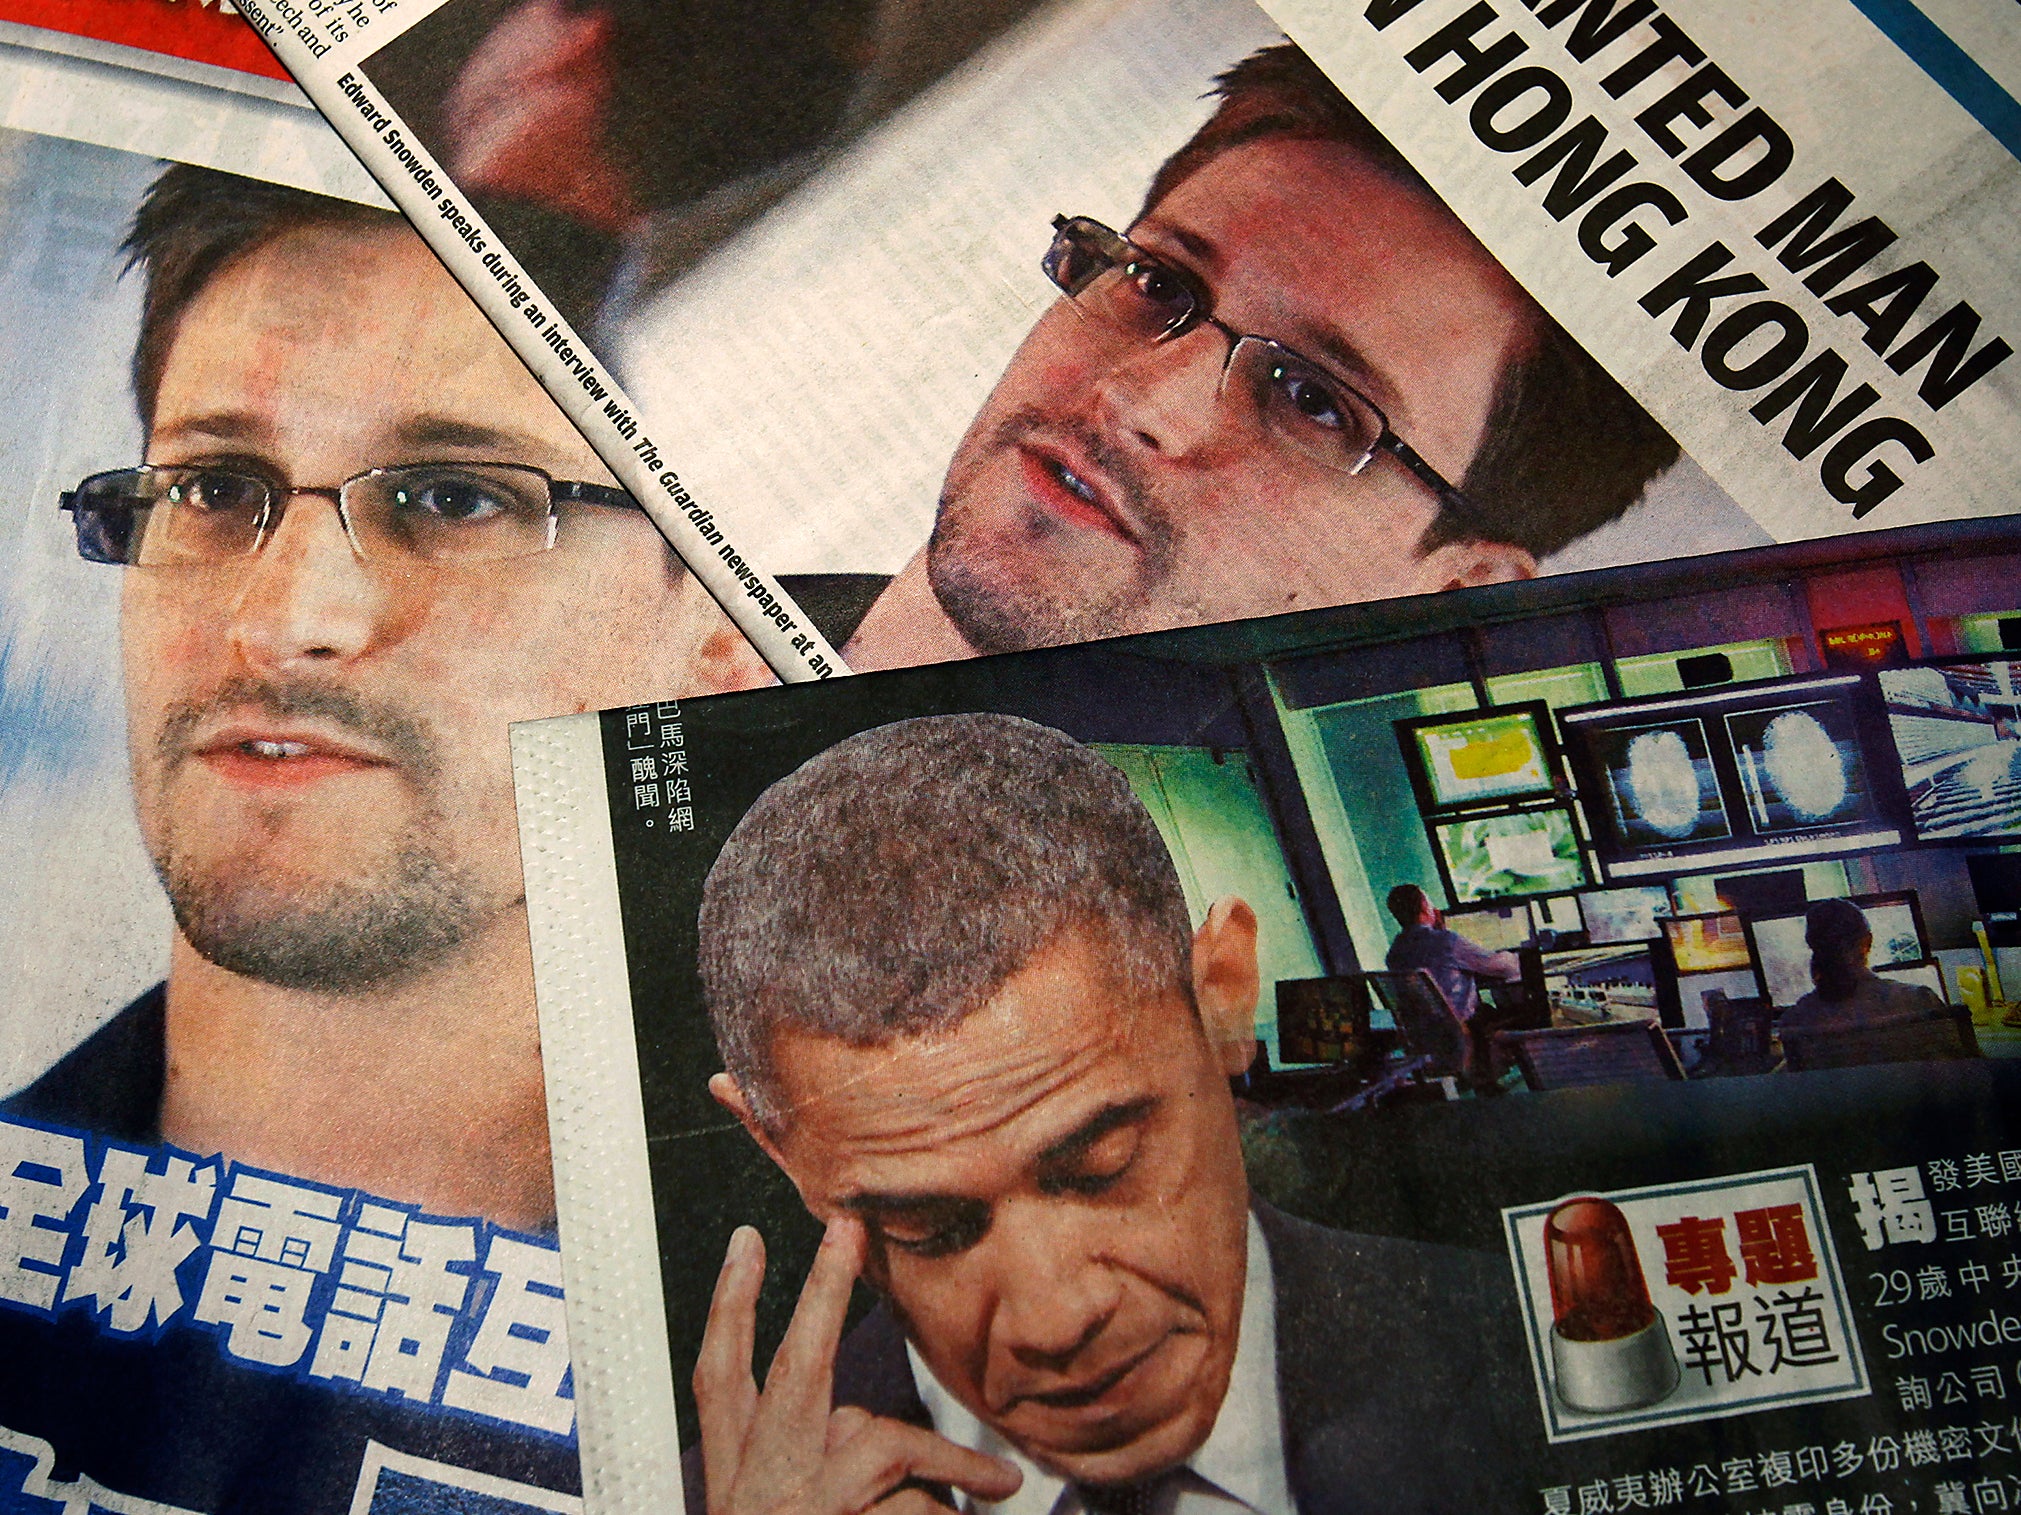 Edward Snowden on the front pages of local English and Chinese newspapers after the NSA contractor leaked details of US surveillance programmes.